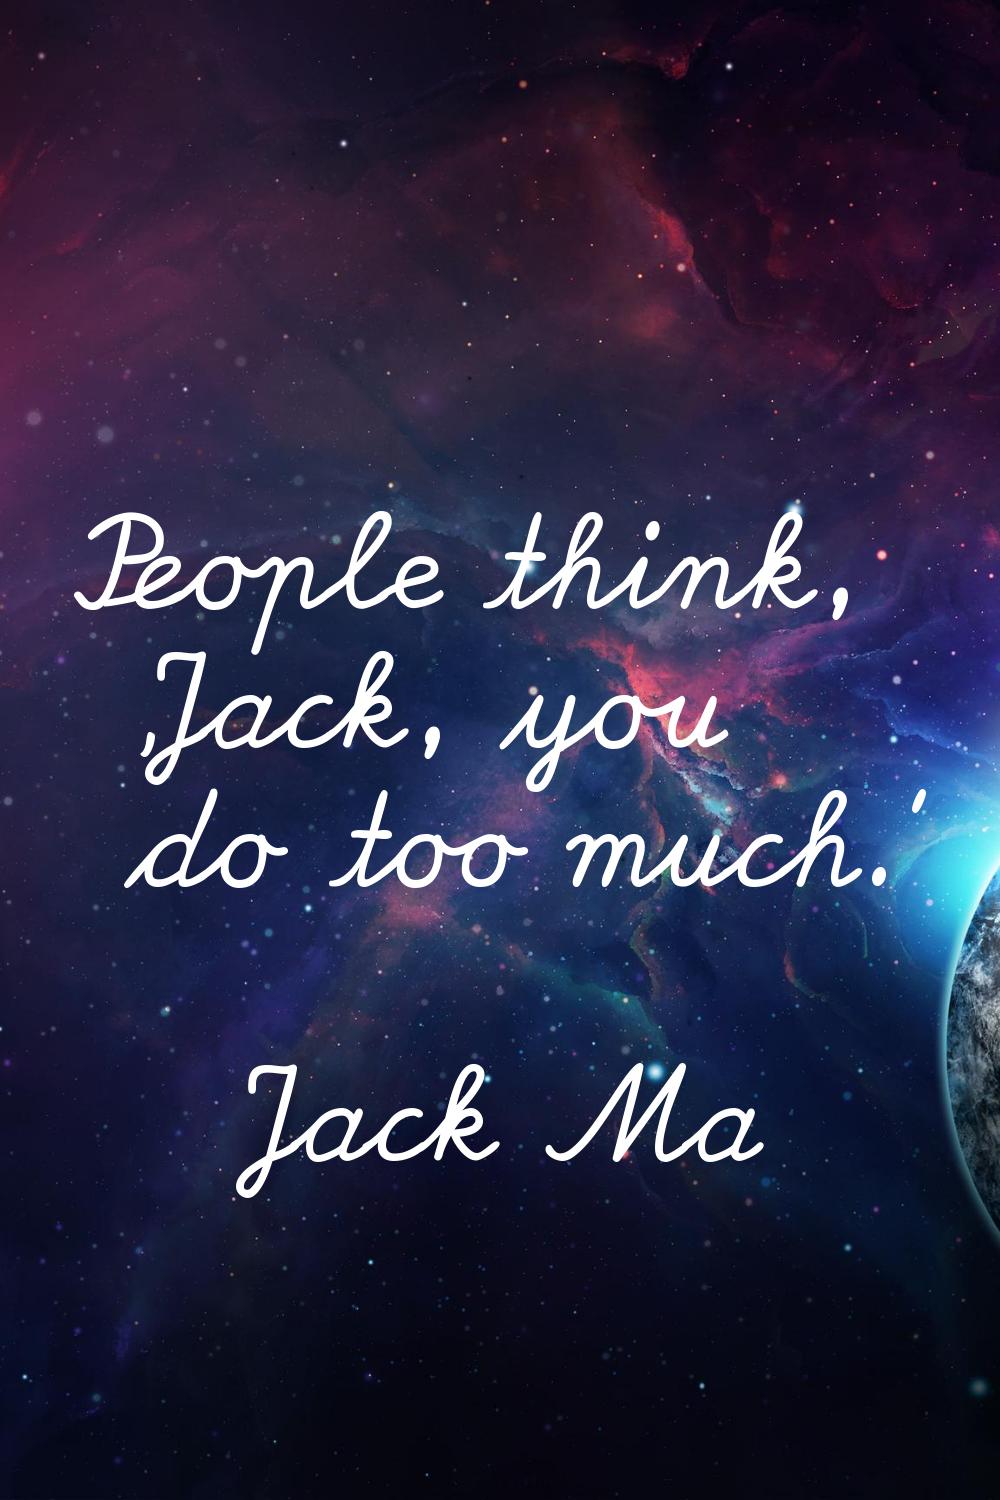 People think, 'Jack, you do too much.'